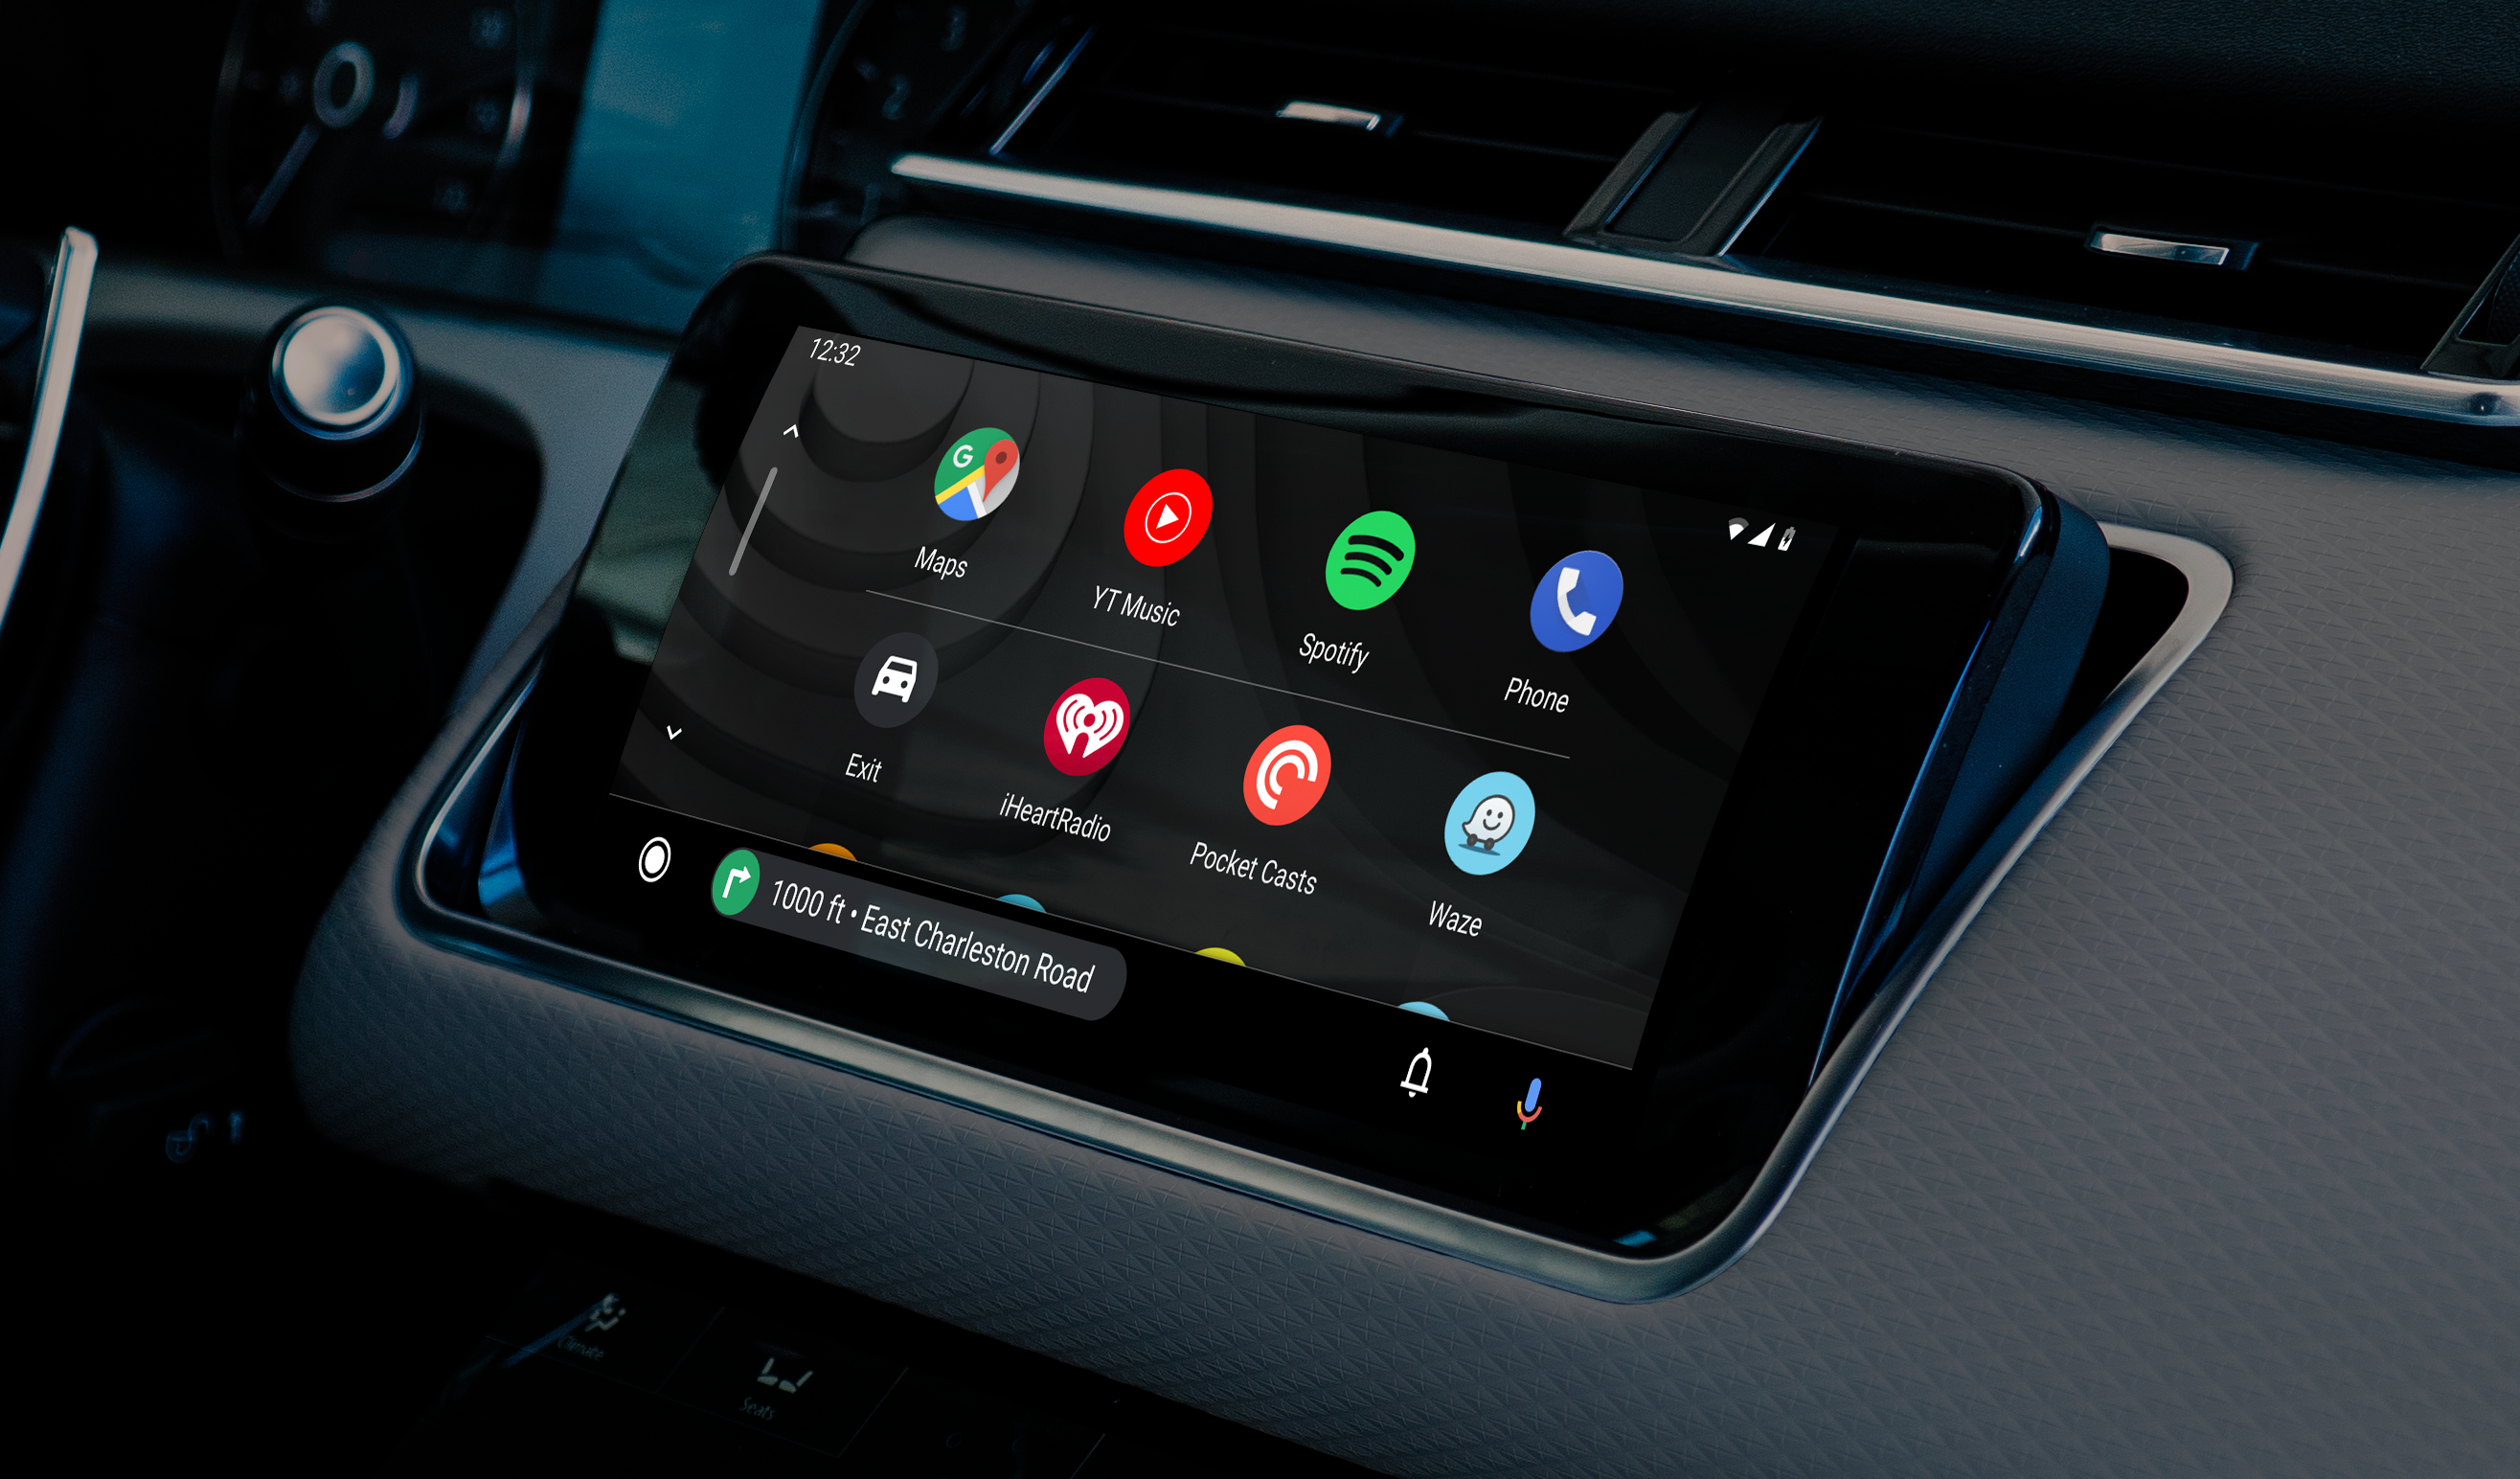 Google affirms it’s the stopping point for Android Auto on phone screens